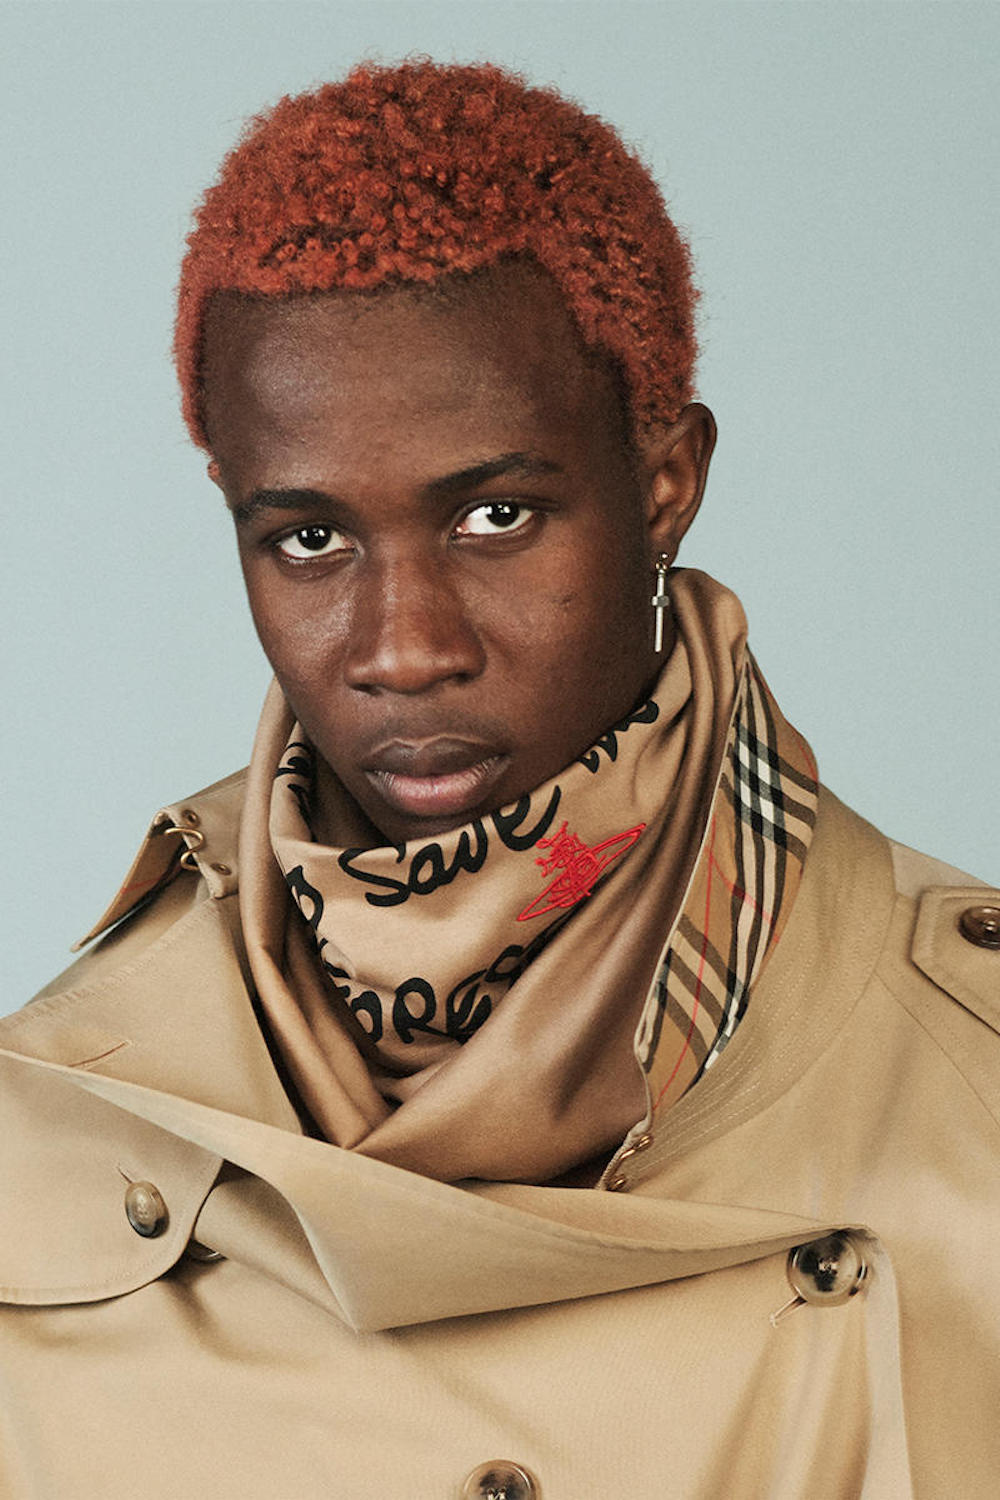 Check Out The Burberry x Vivienne Westwood Collaboration in Full